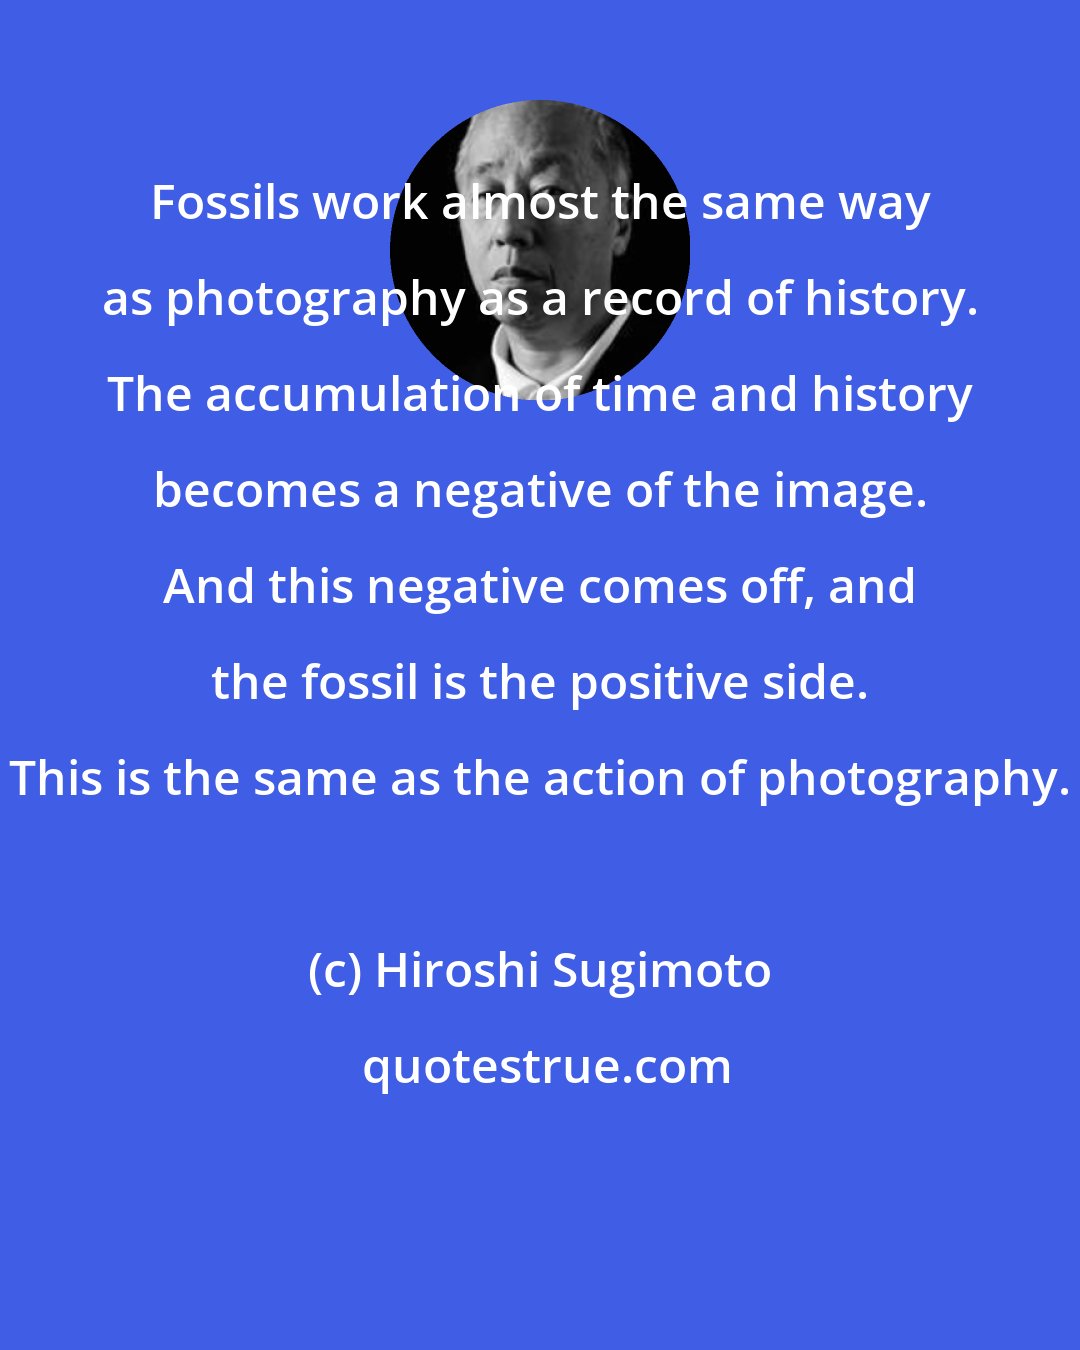 Hiroshi Sugimoto: Fossils work almost the same way as photography as a record of history. The accumulation of time and history becomes a negative of the image. And this negative comes off, and the fossil is the positive side. This is the same as the action of photography.